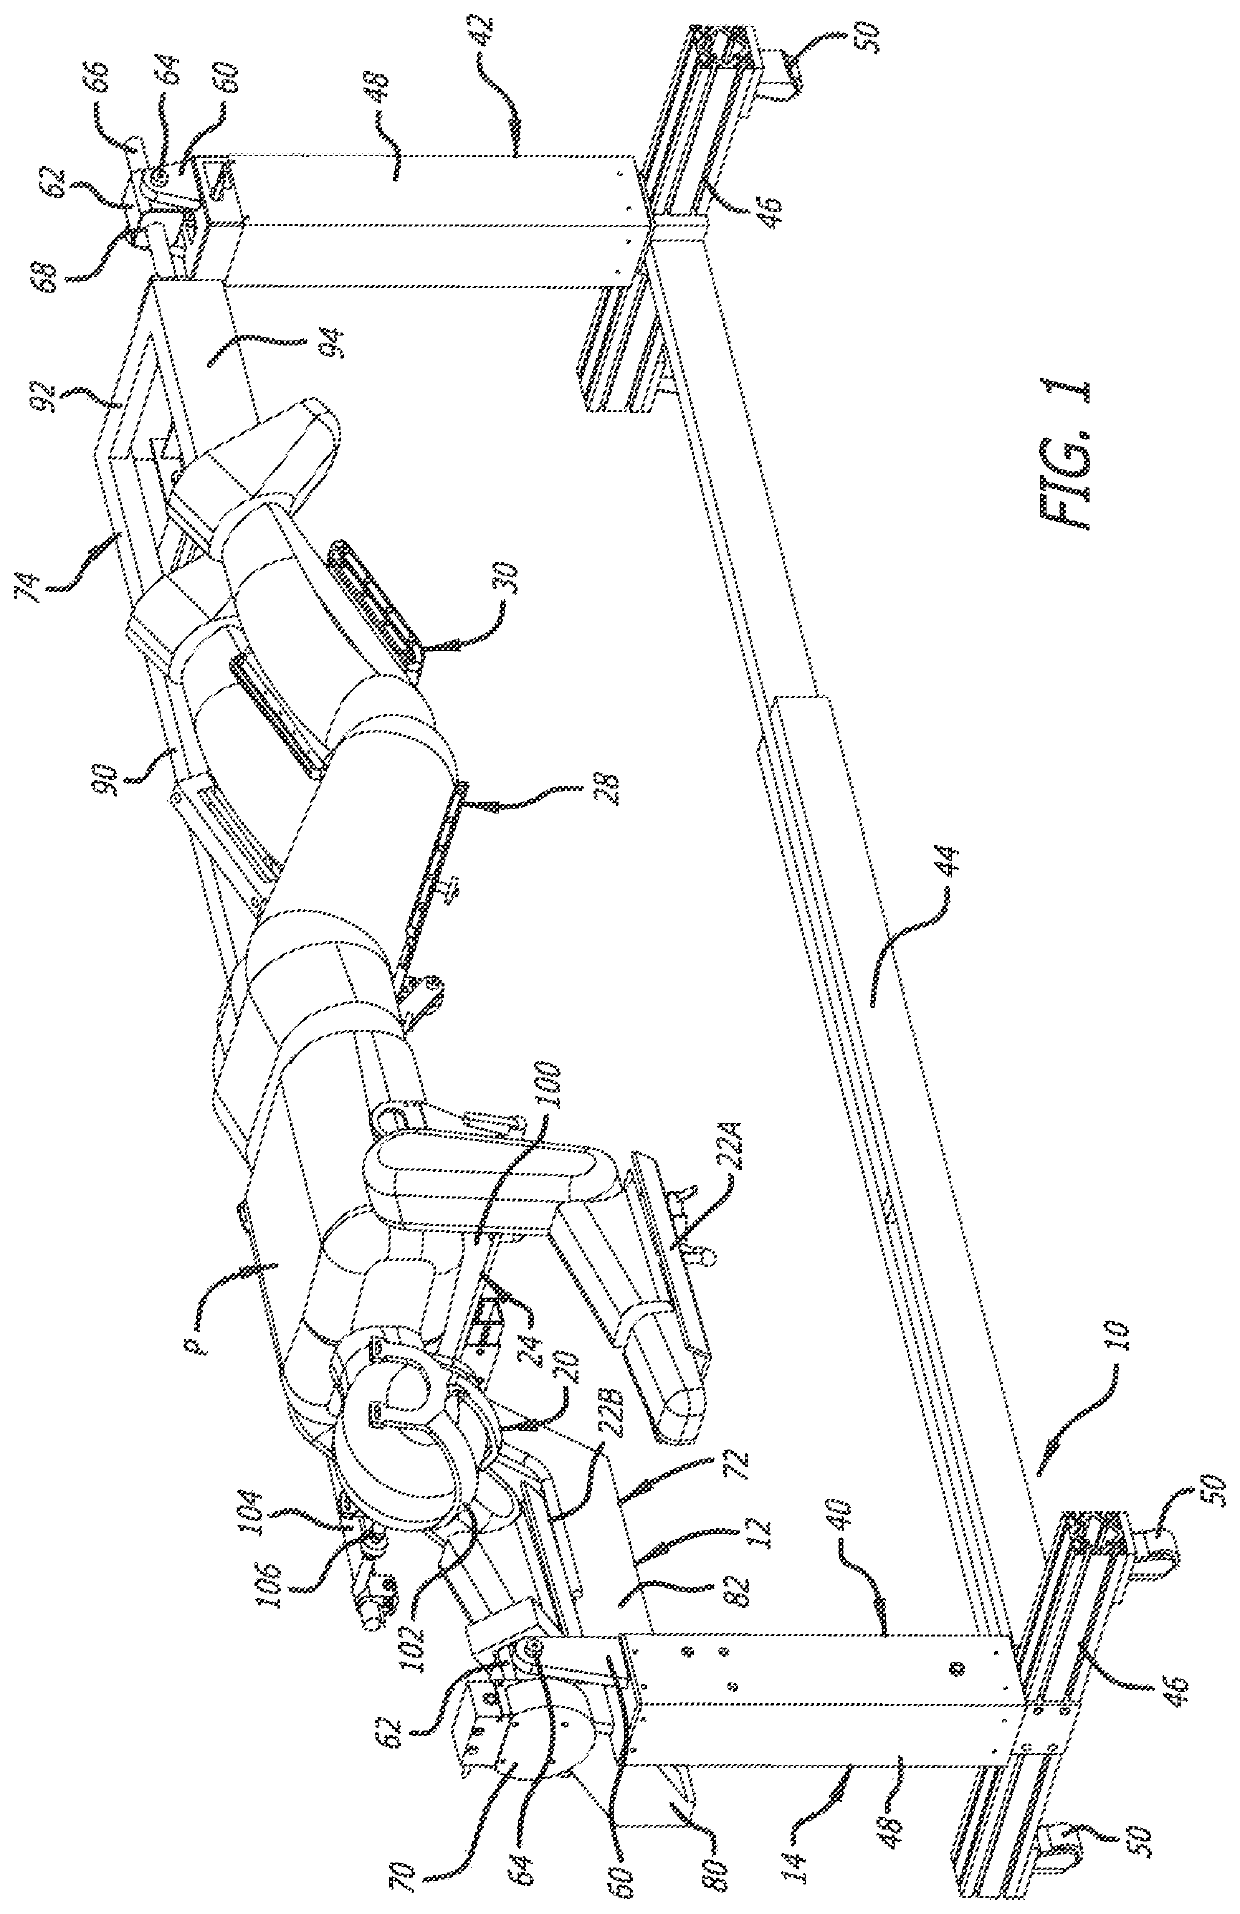 Surgical frame including torso-sling and method for use thereof